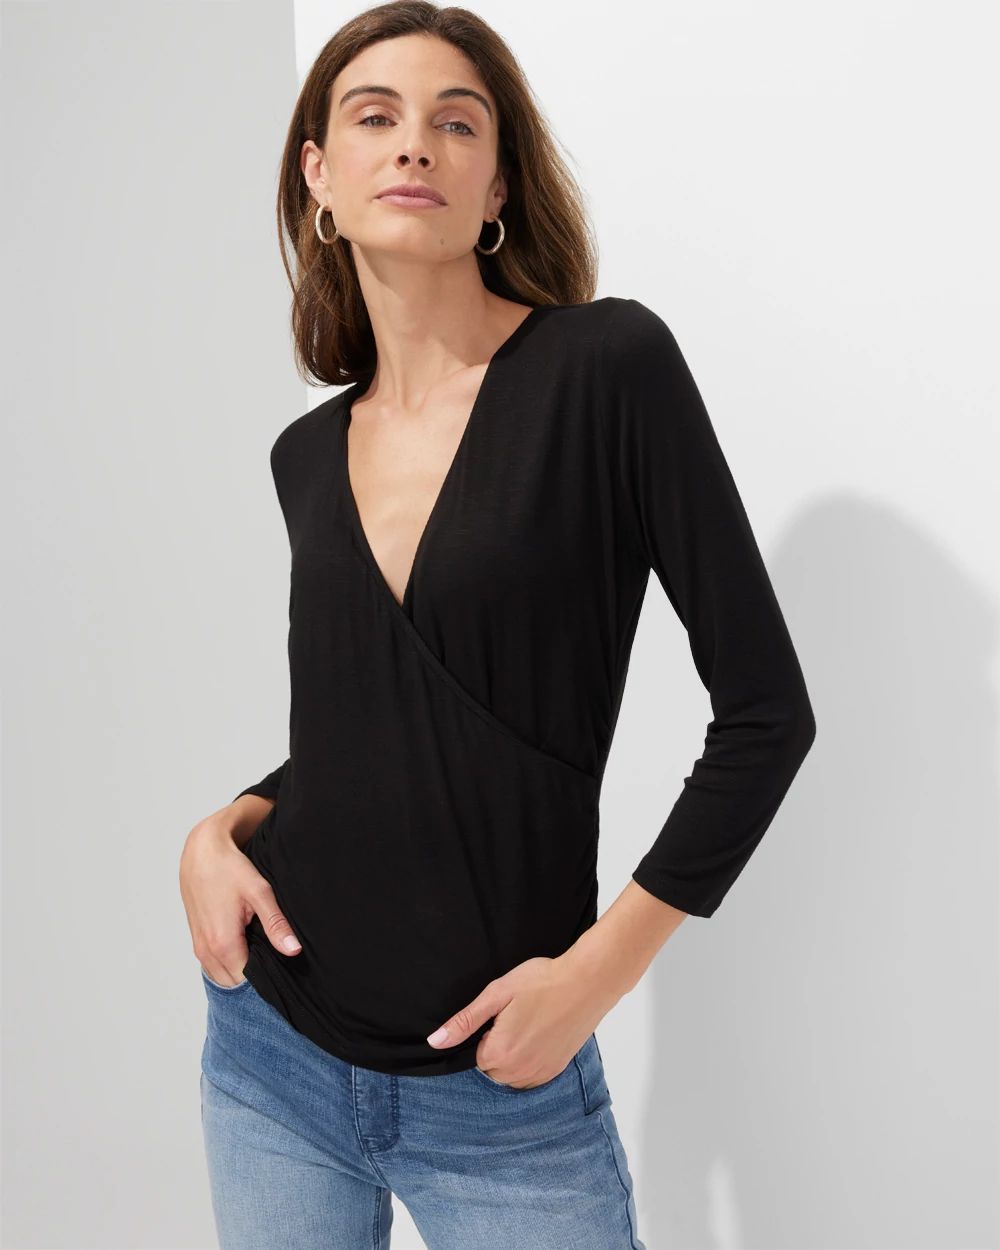 Outlet WHBM Surplice 3/4-Sleeve Tee